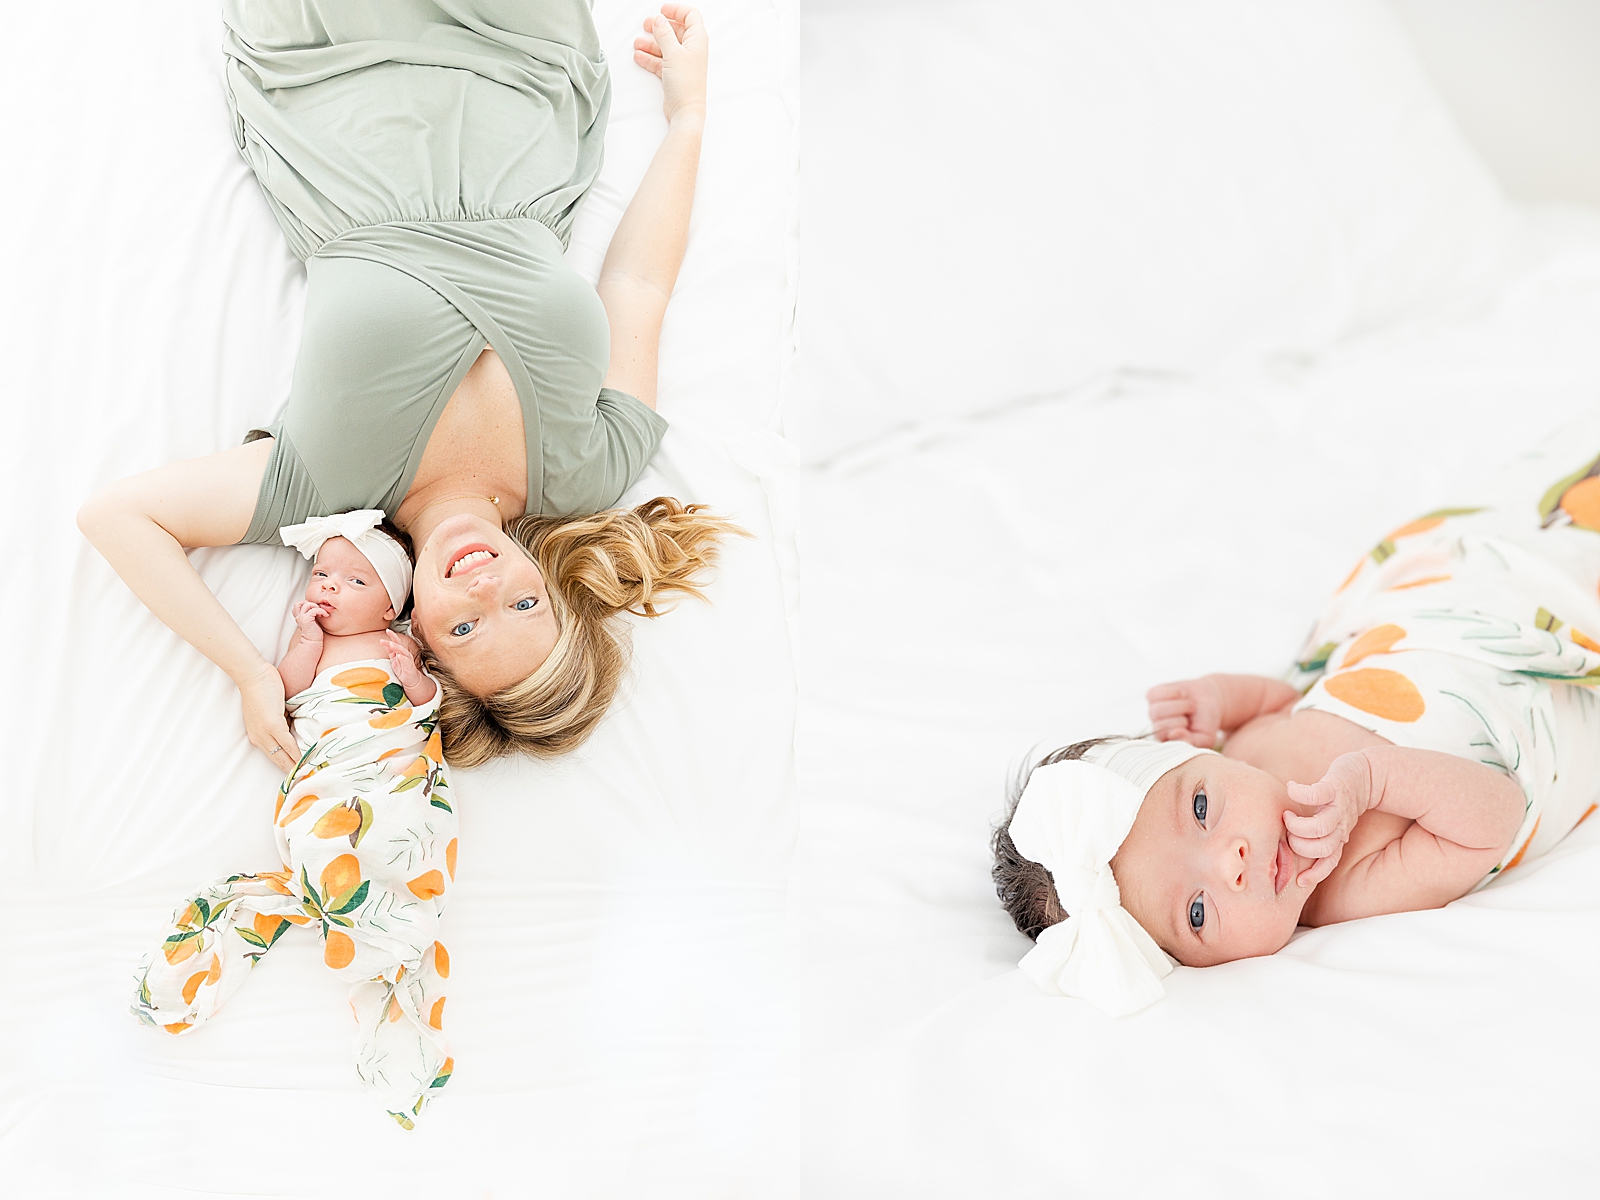 Baby laying on bed with white bow in clementine swaddle looking right at camera and mom and baby head to head laying on bed looking up at camera at lifestyle newborn session